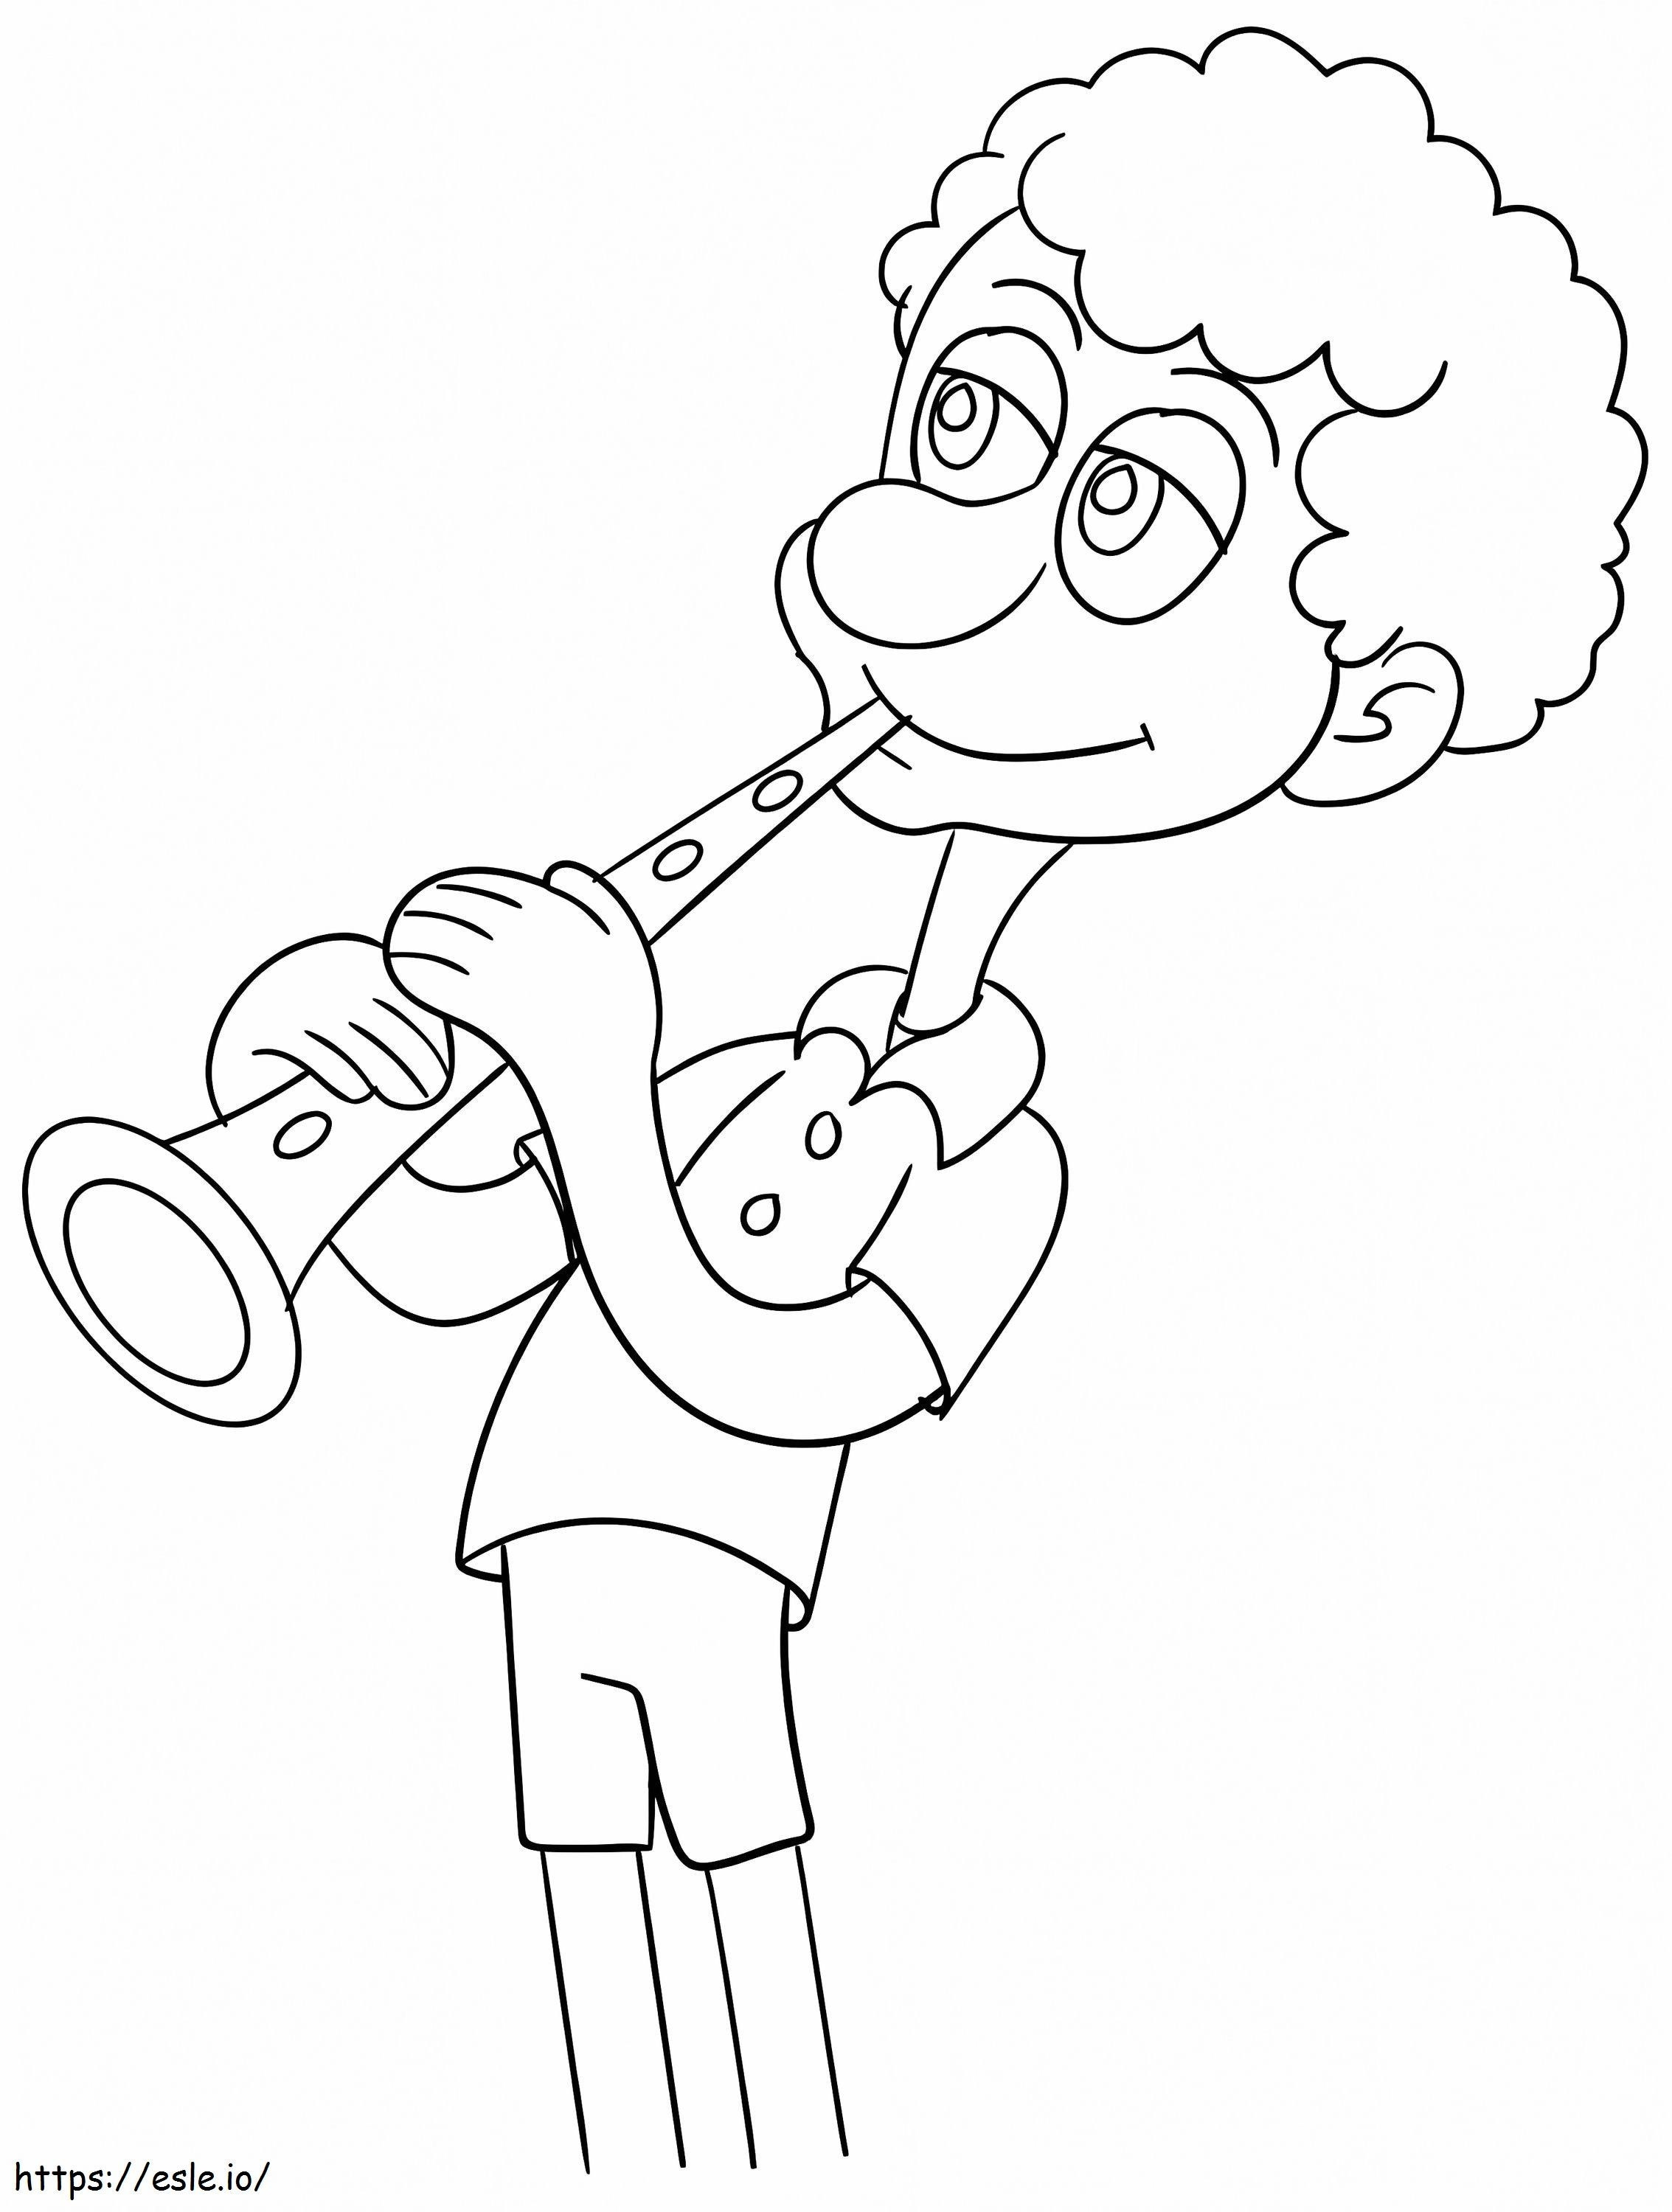 A Boy Playing Clarinet coloring page